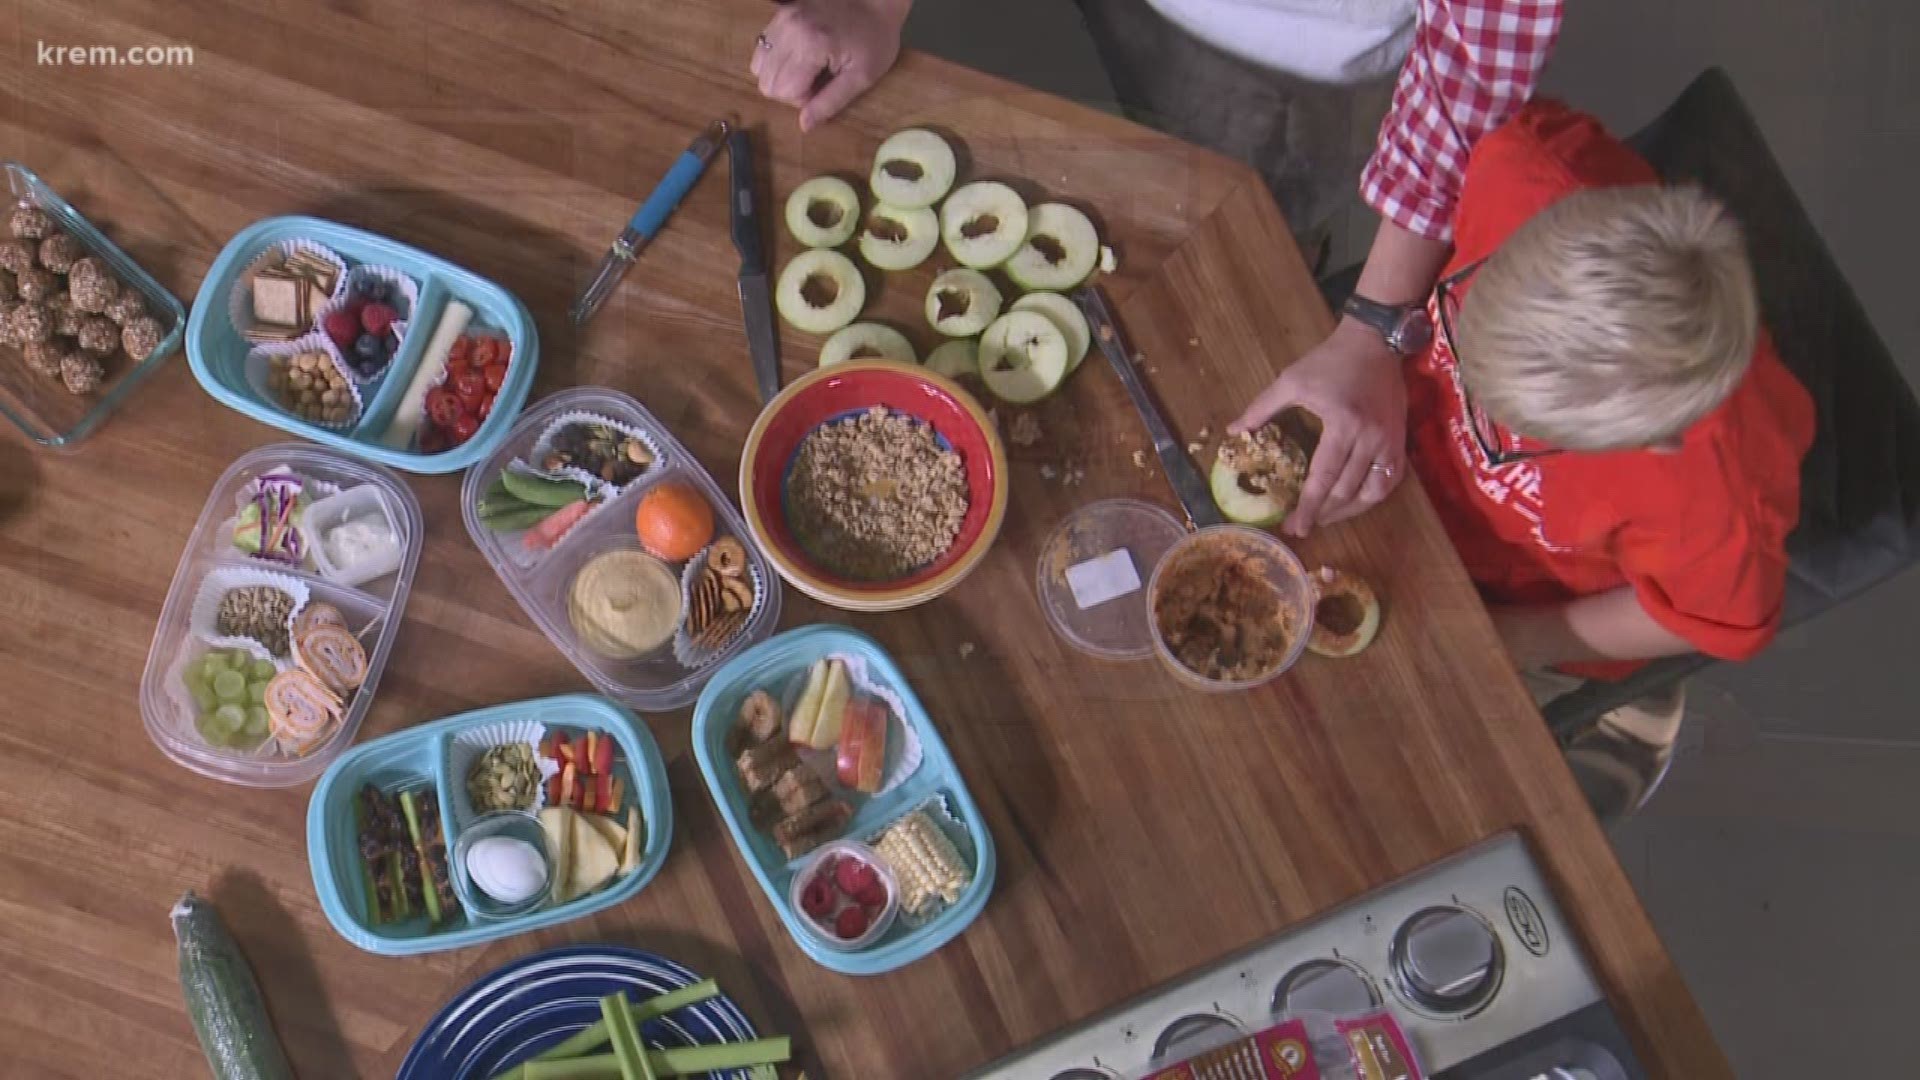 KREM 2's health reporter Rose Beltz and Heritage Health show us how to cook healthy meals at home any child will love.